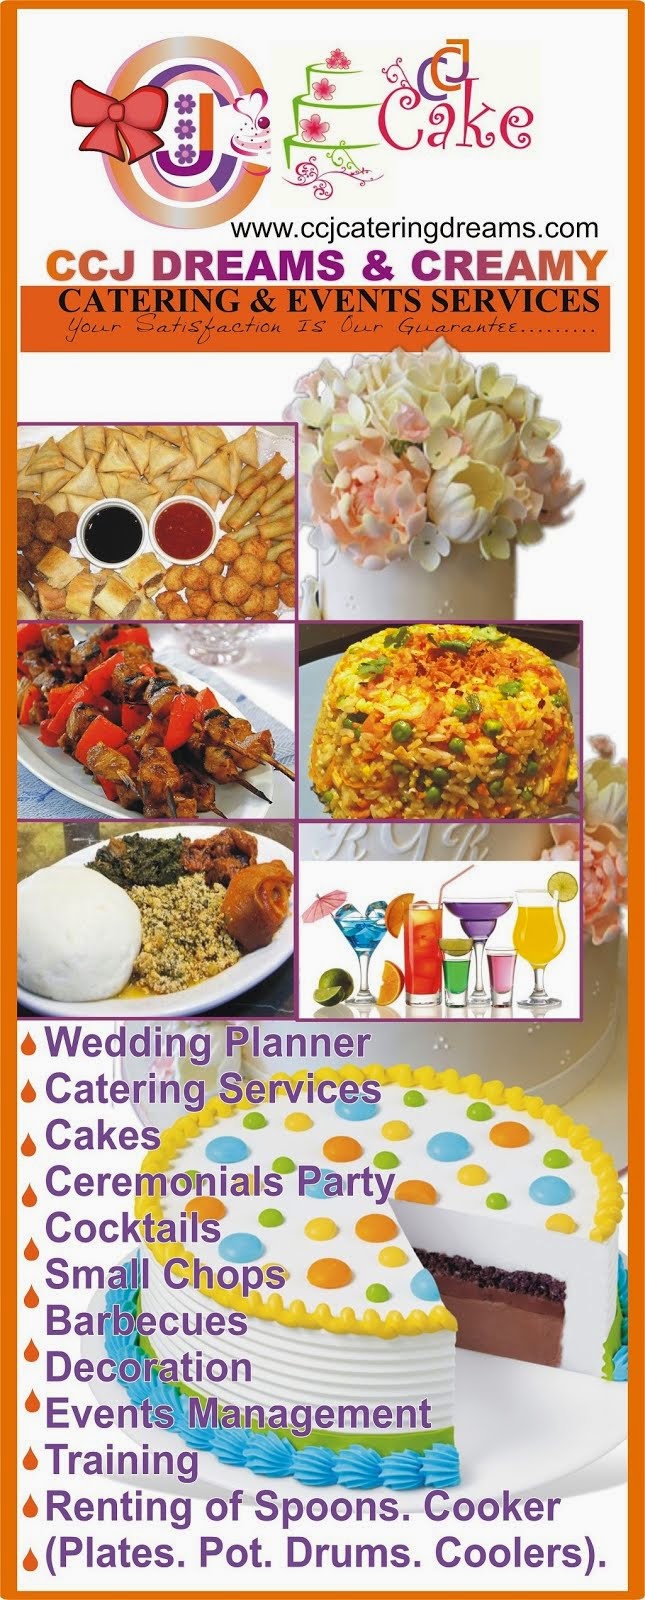 CCJ DREAMS CATERING & EVENTS PLANNER